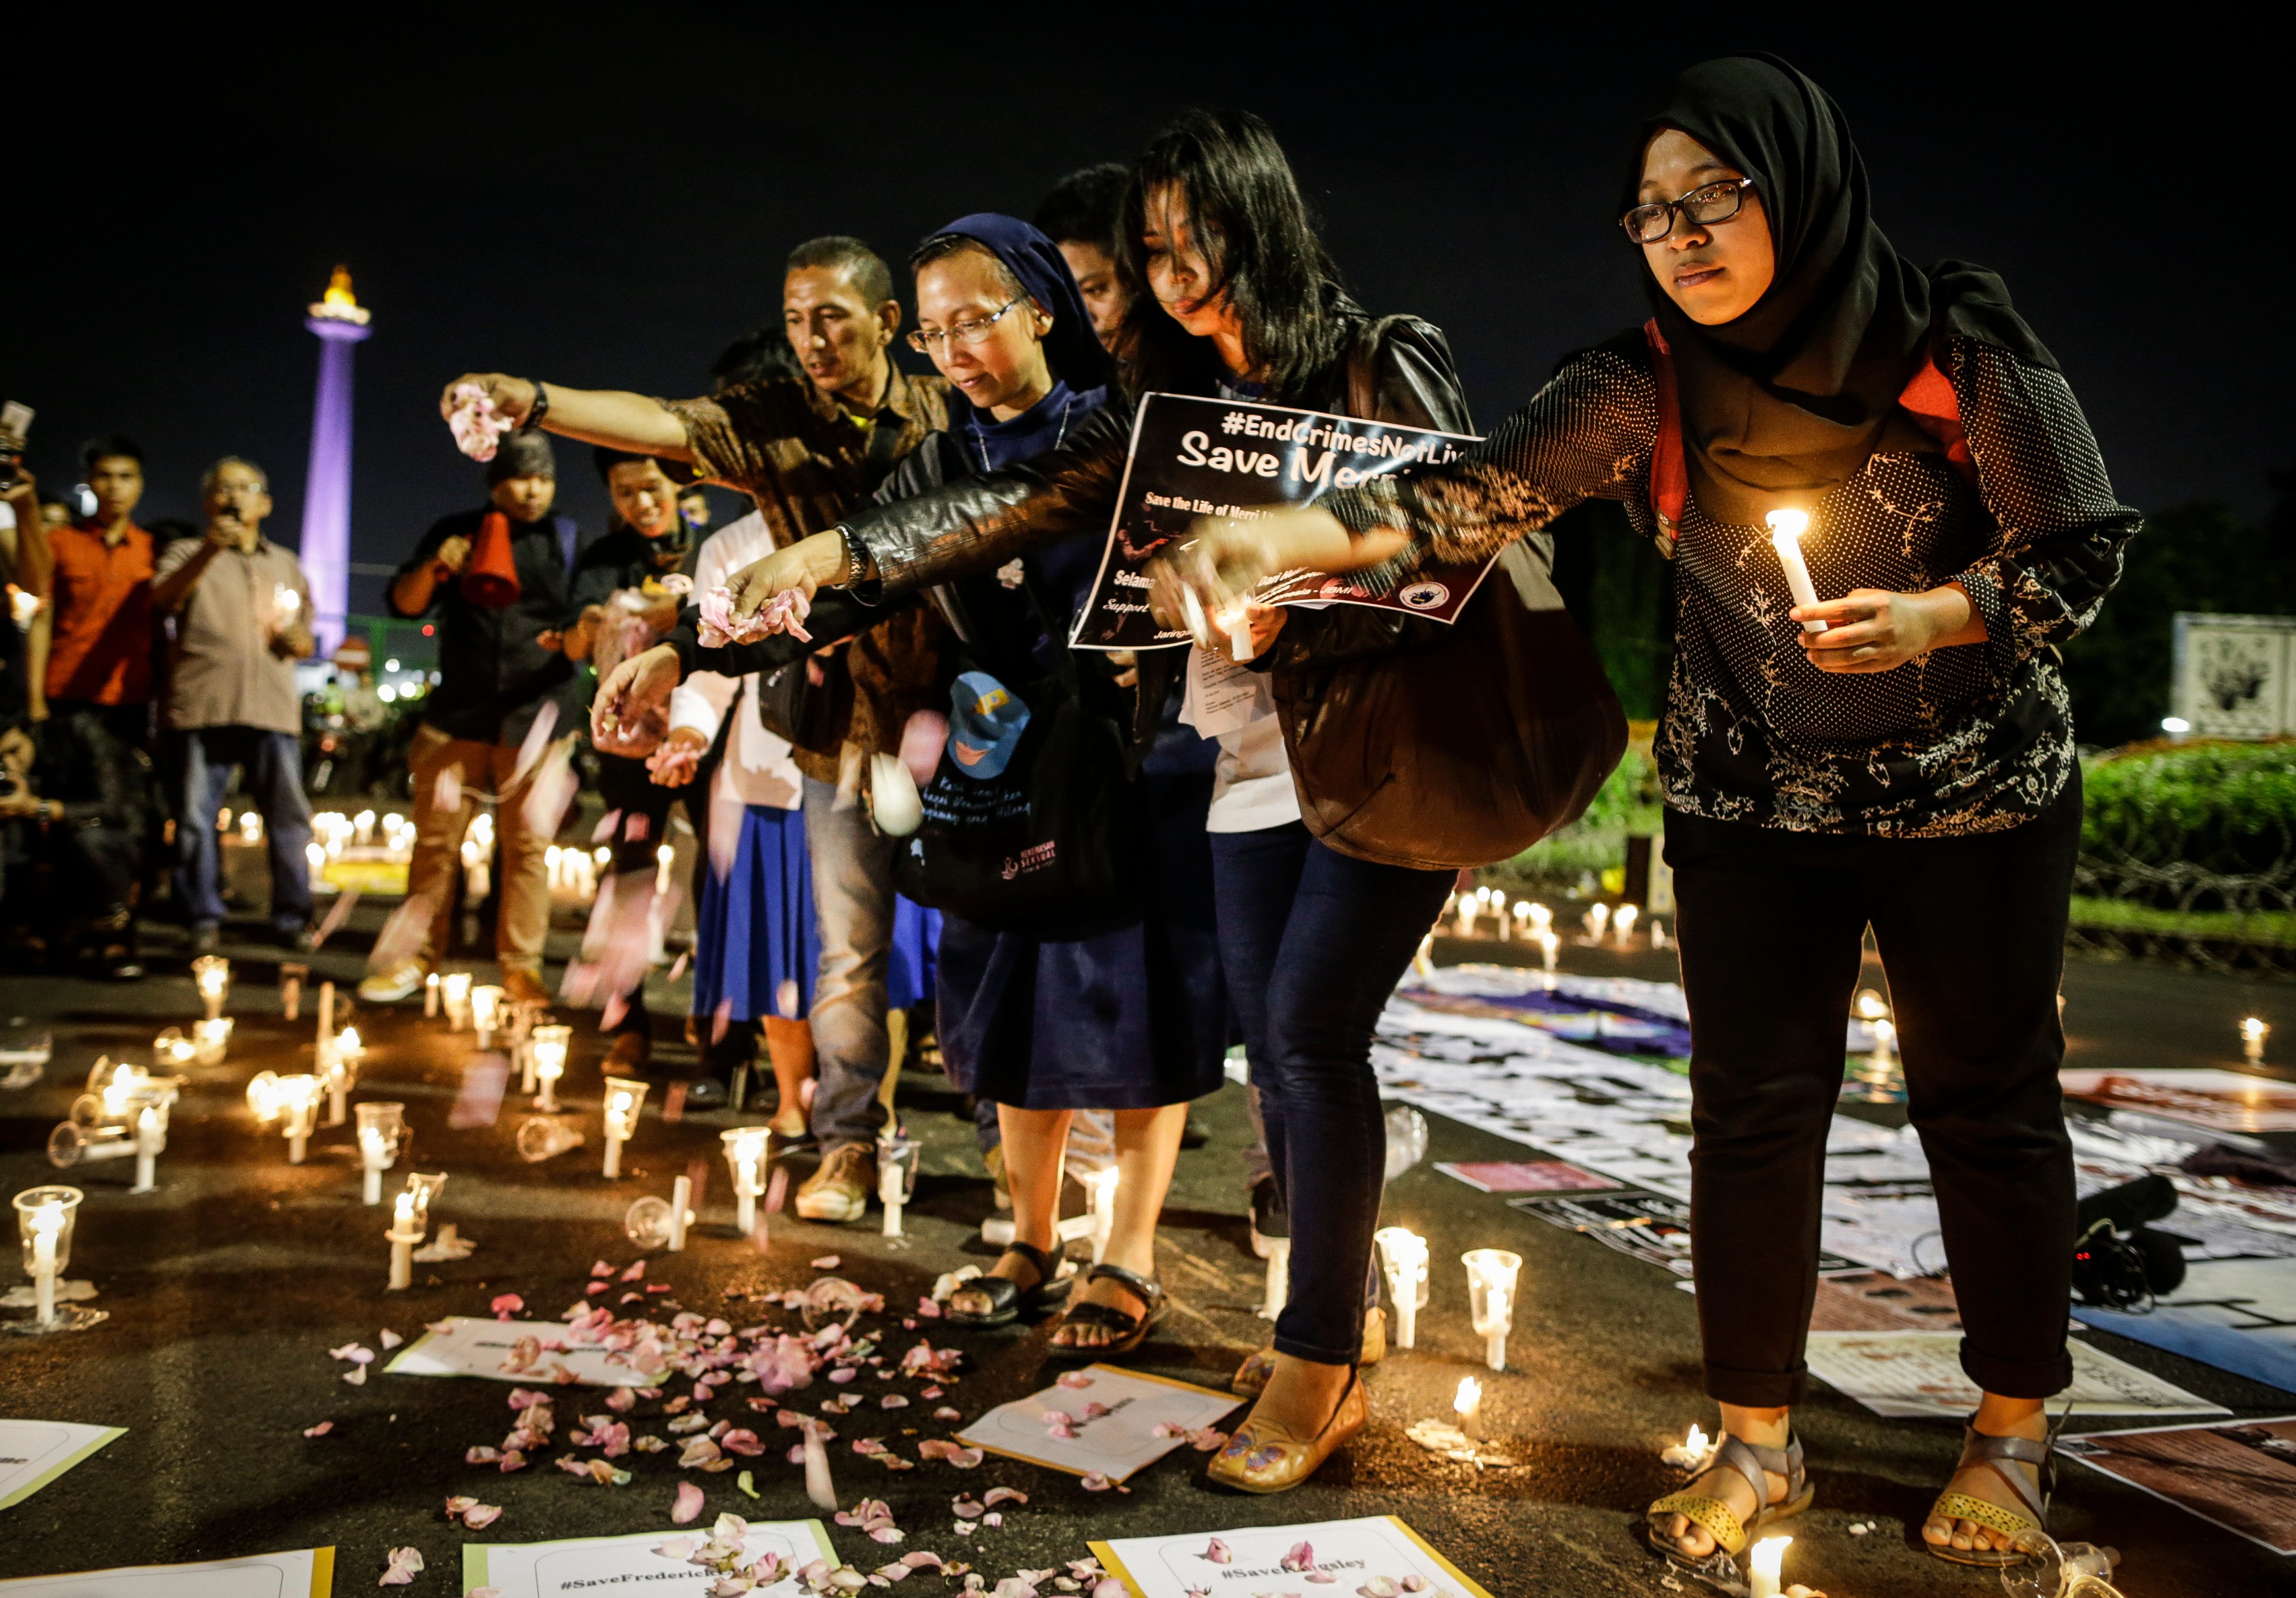 DEATH PENALTY. Indonesian activists throw flower petals during a candlelight protest against death penalty executions, outside the presidential palace in Jakarta, Indonesia, 28 July 2016. EPA 